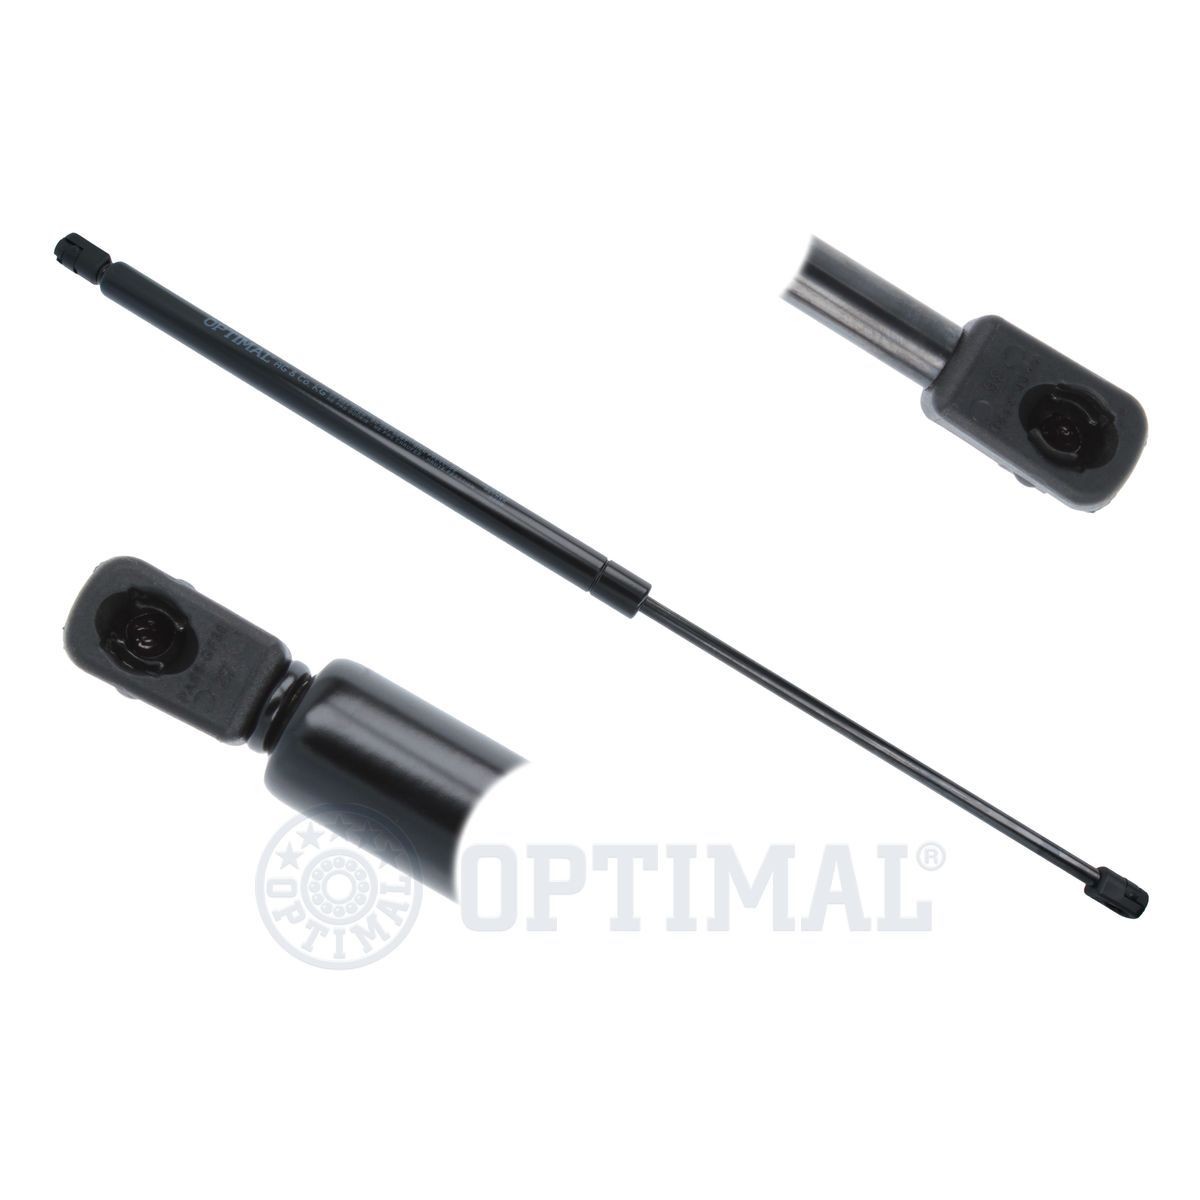 OPTIMAL 800N, 662 mm, with stop function Stroke: 261mm Gas spring, boot- / cargo area AG-51476 buy